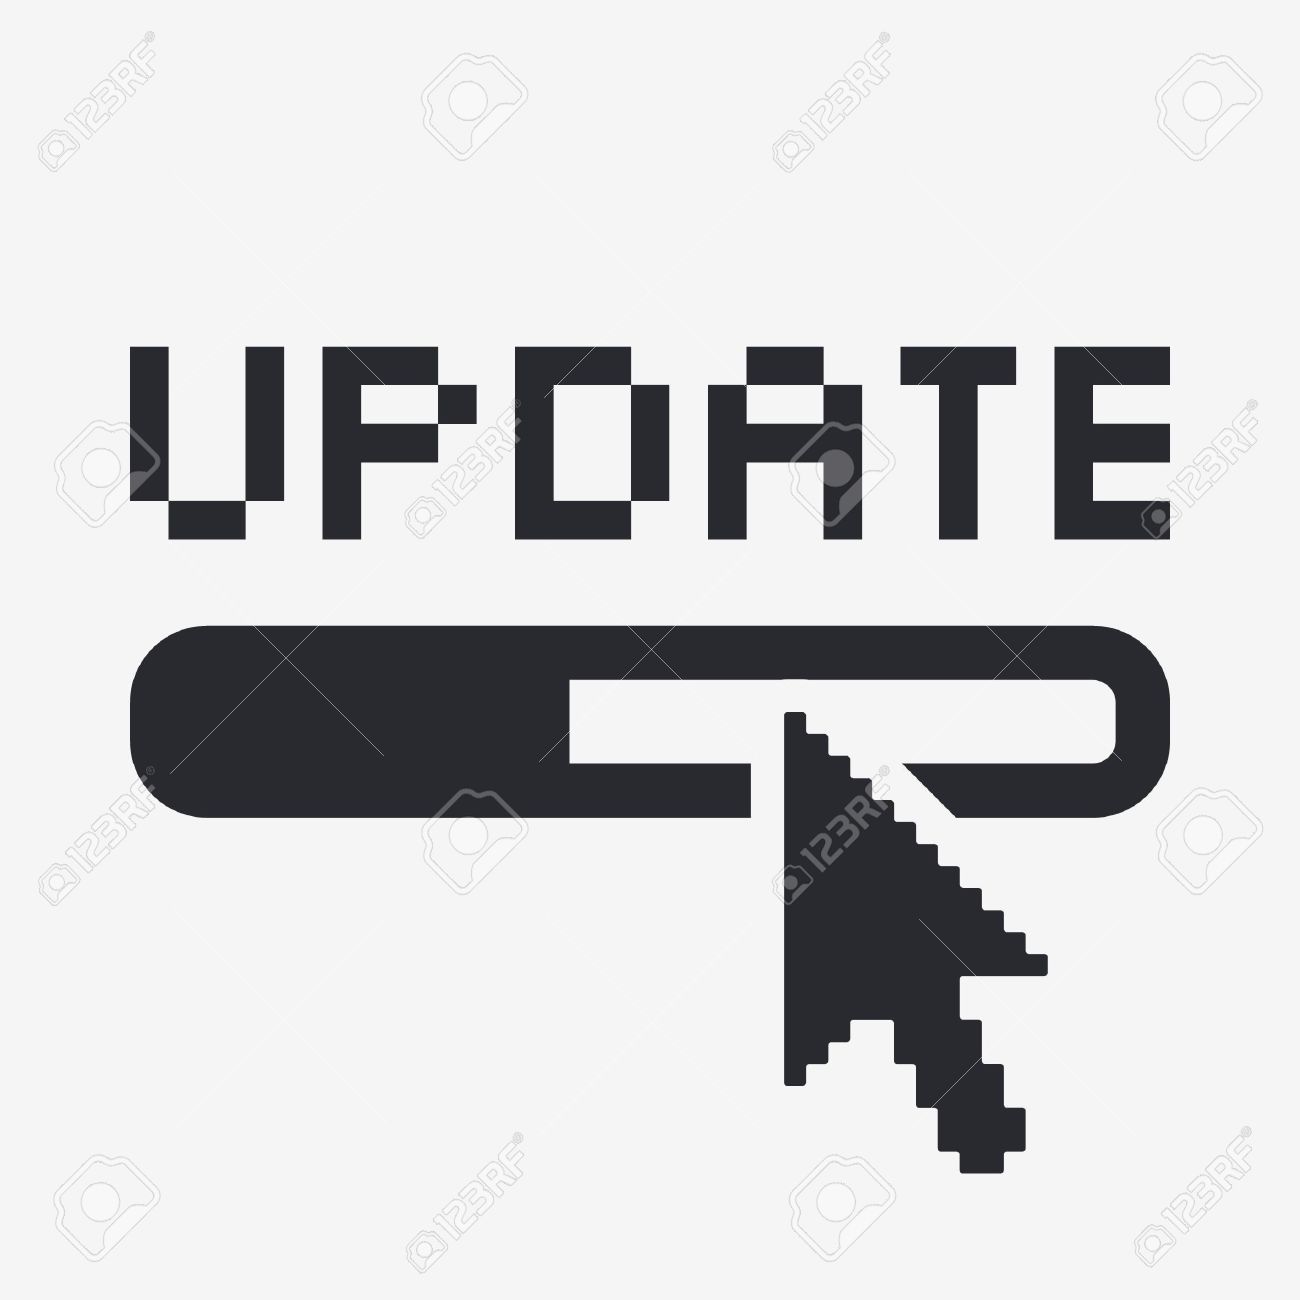 Update application progress icon Royalty Free Vector Image